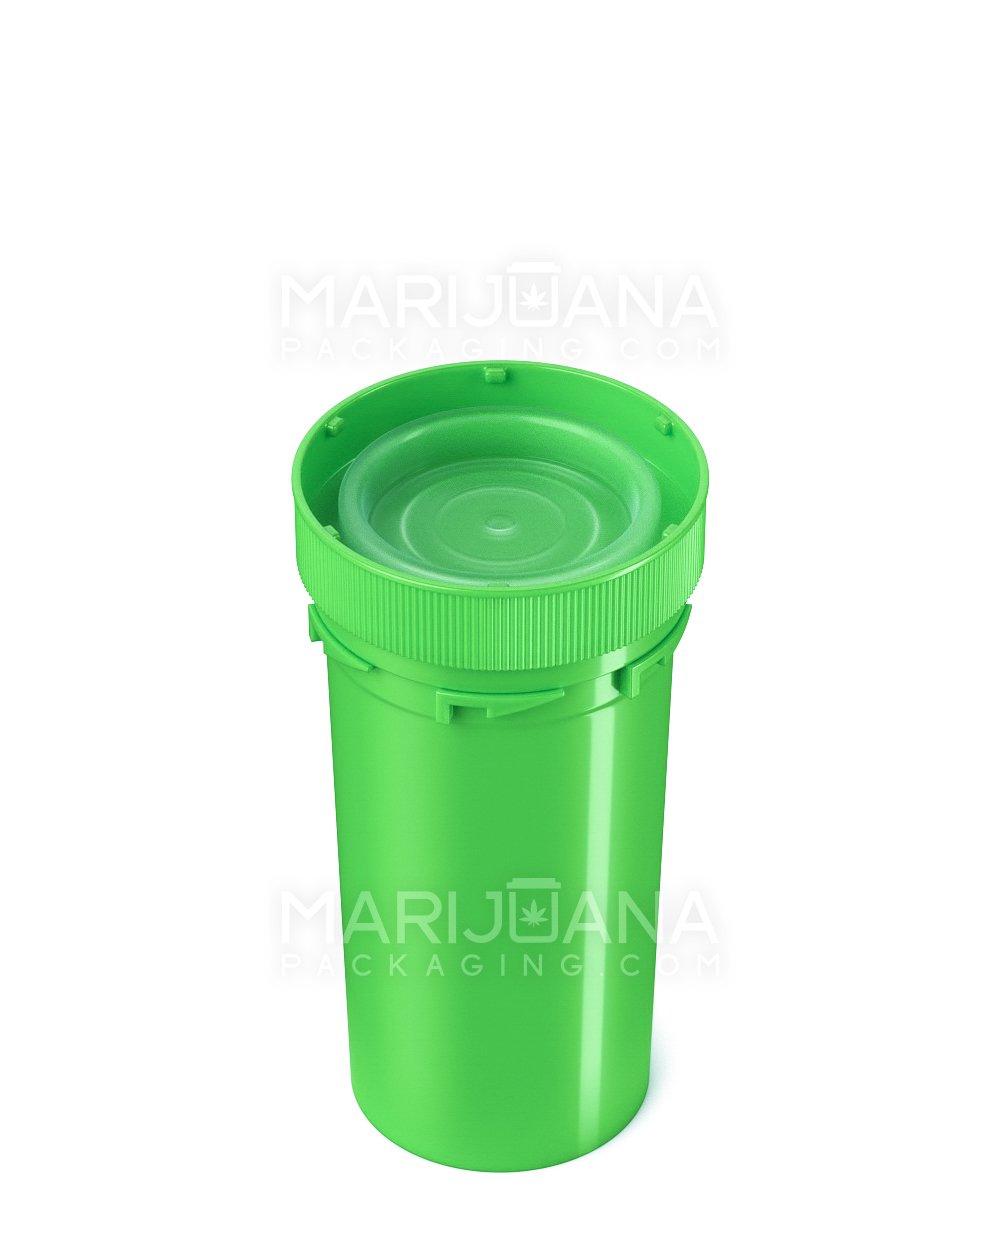 Child Resistant | Opaque Lime Green Reversible Cap Vial 2.0 | 40dr - 10g - 150 Count - 5